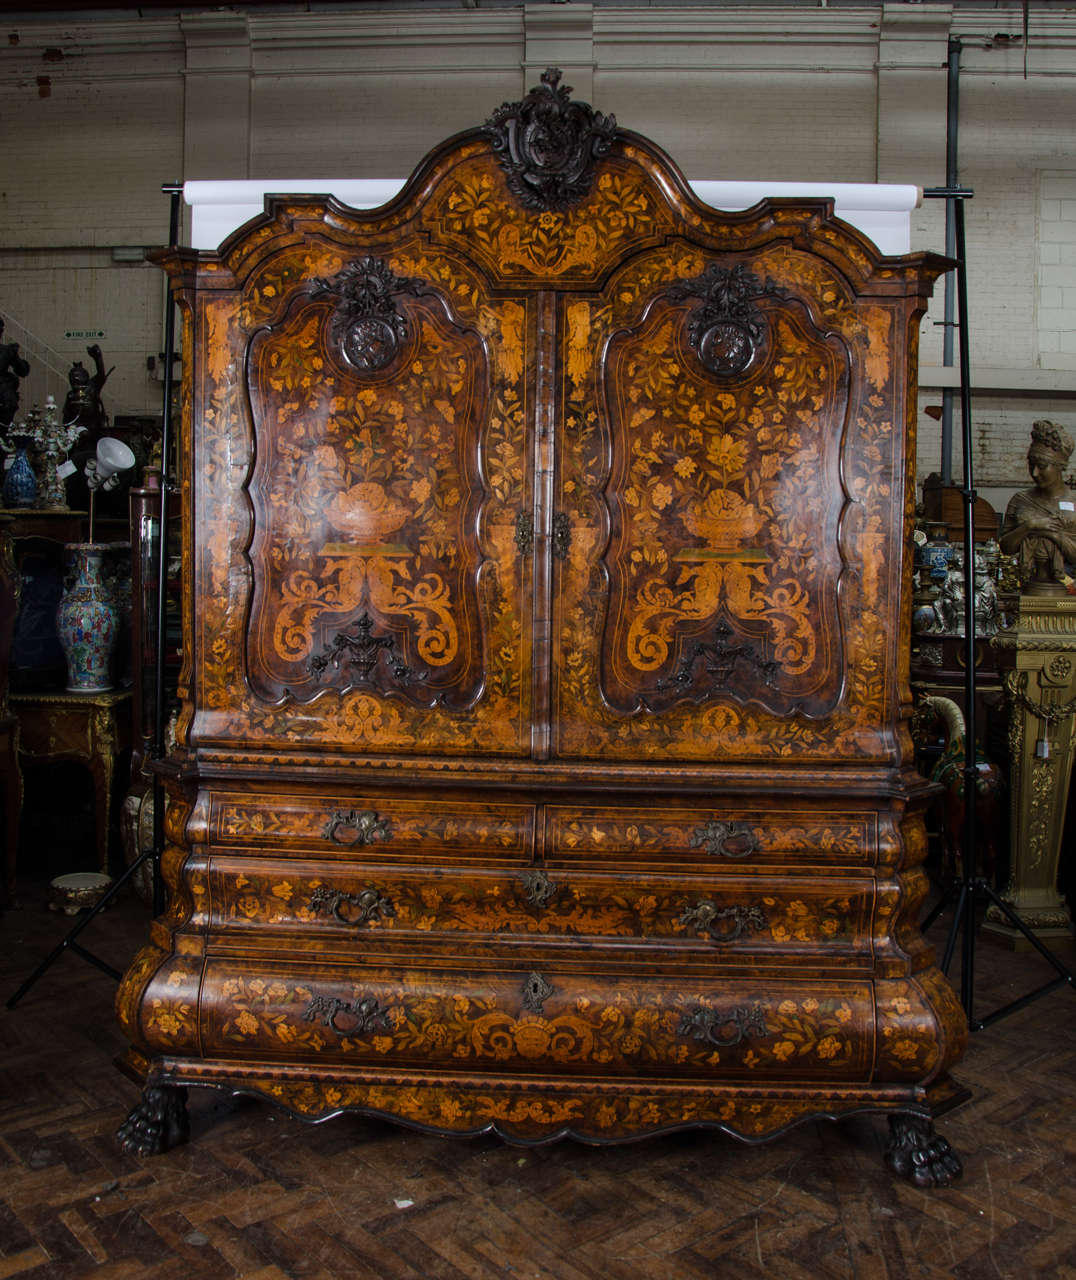 A very imposing 18th century walnut, Dutch marquetry armoire. Having wonderful scrolling foliate inlaid decoration set in recessed panels to the doors. Carved mahogany plaques depicting classical busts. The base being bombe fronted, canted corners